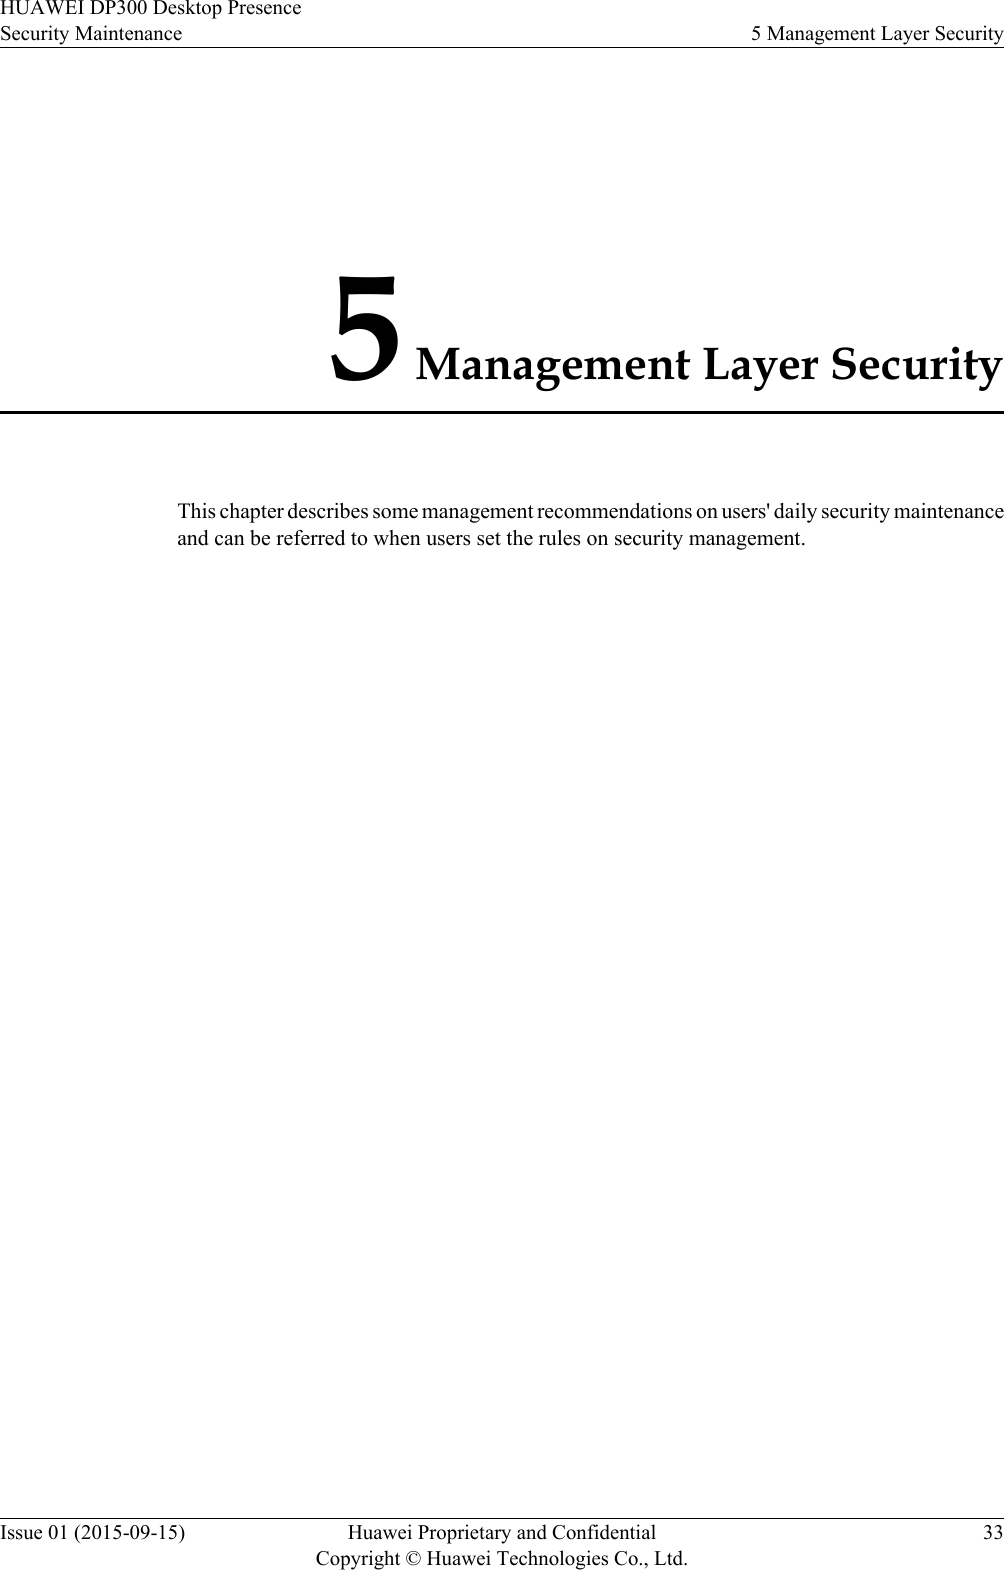 5 Management Layer SecurityThis chapter describes some management recommendations on users&apos; daily security maintenanceand can be referred to when users set the rules on security management.HUAWEI DP300 Desktop PresenceSecurity Maintenance 5 Management Layer SecurityIssue 01 (2015-09-15) Huawei Proprietary and ConfidentialCopyright © Huawei Technologies Co., Ltd.33